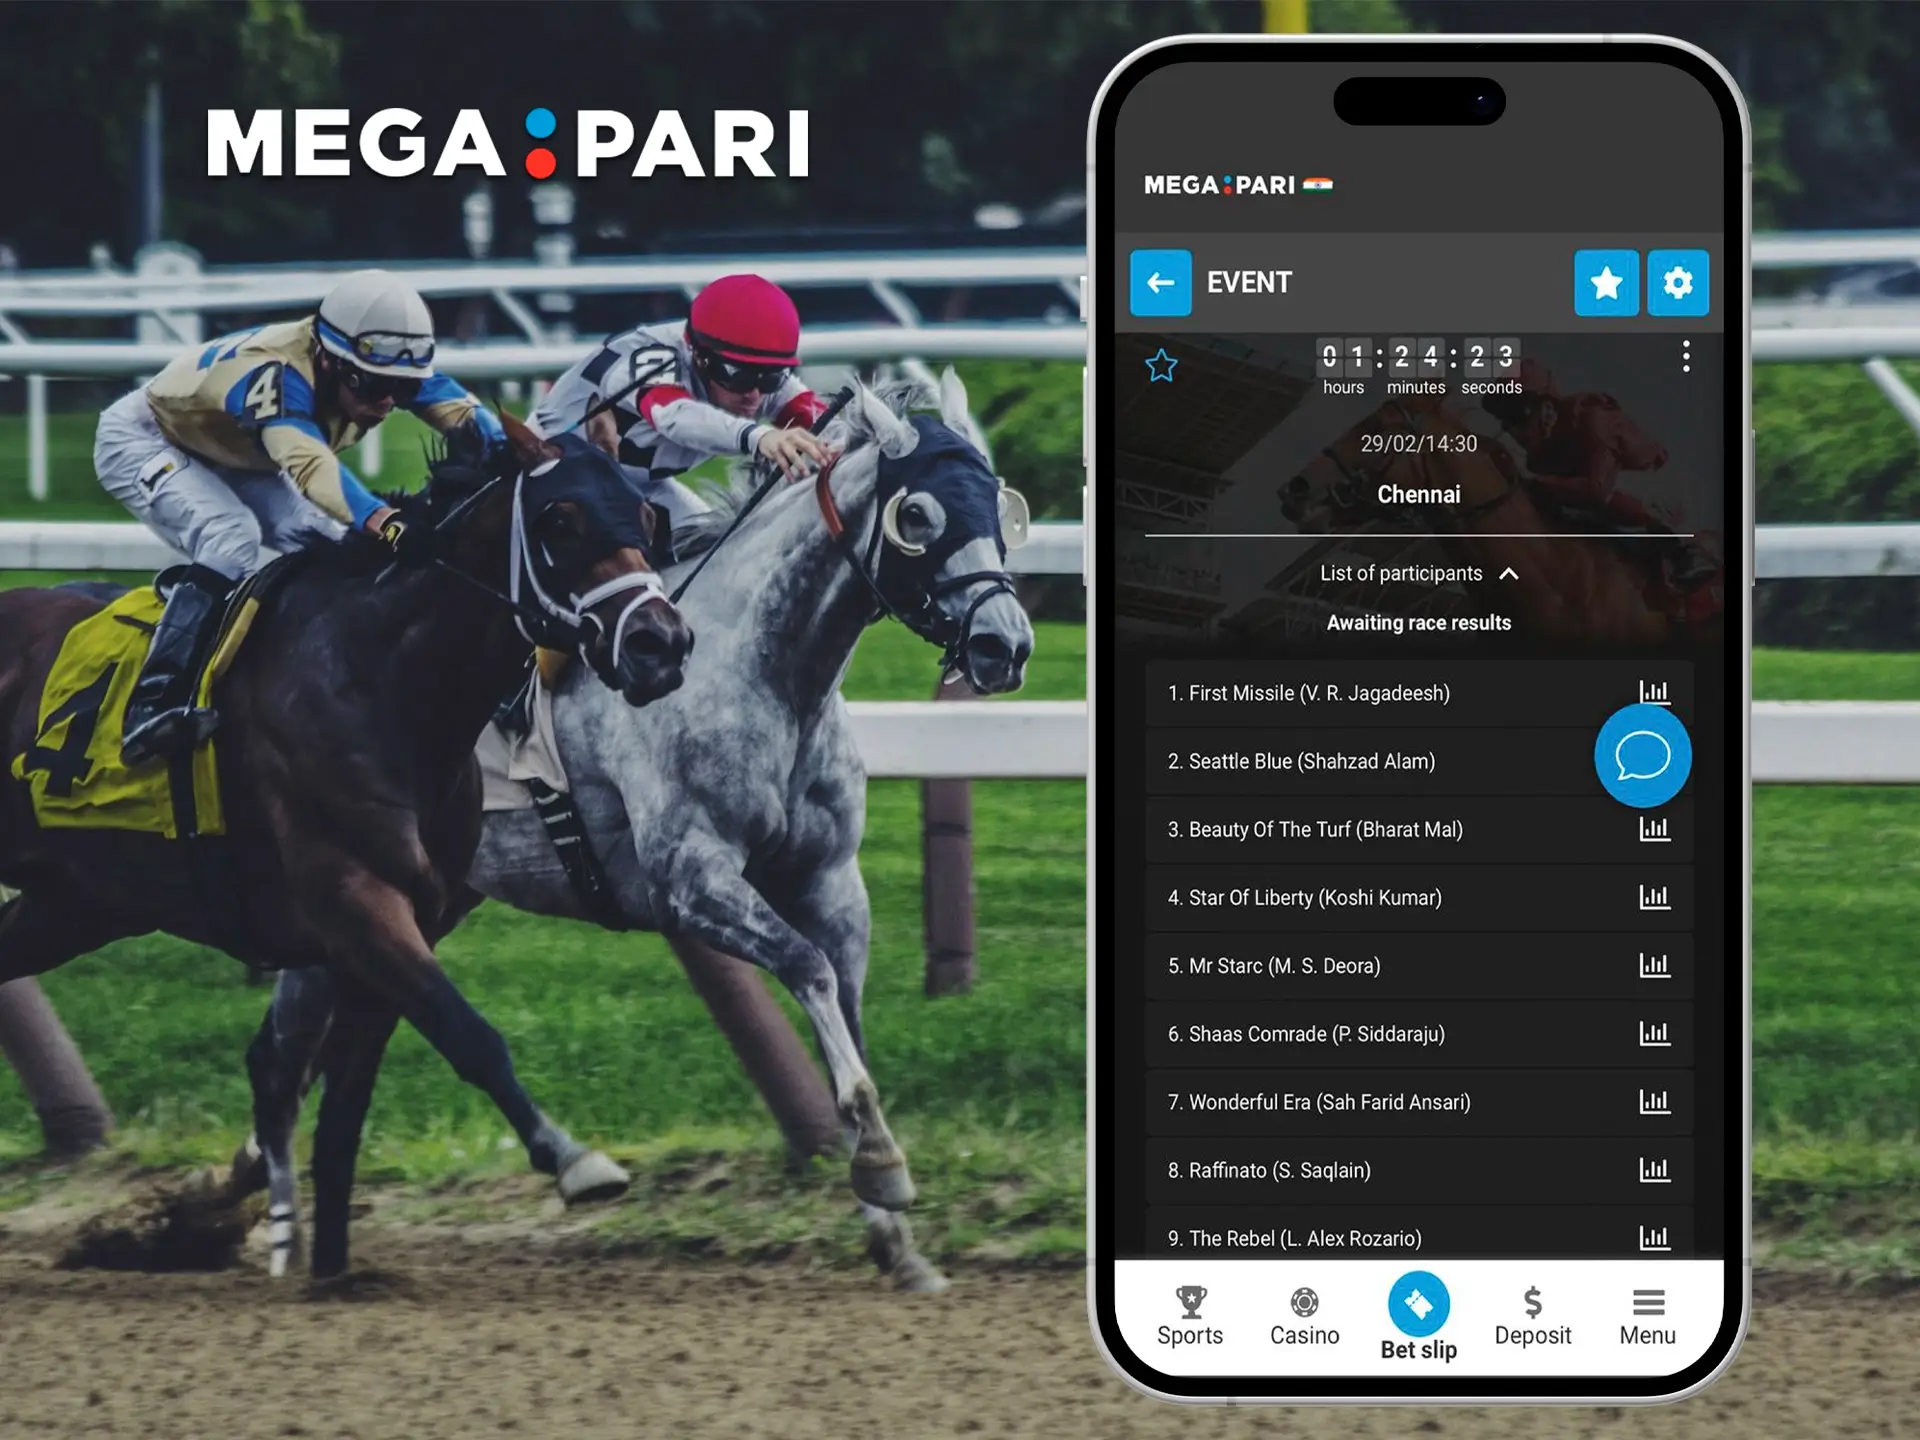 The Megapari app adapts perfectly to any mobile device and produces great graphics when viewing horse racing from your phone.